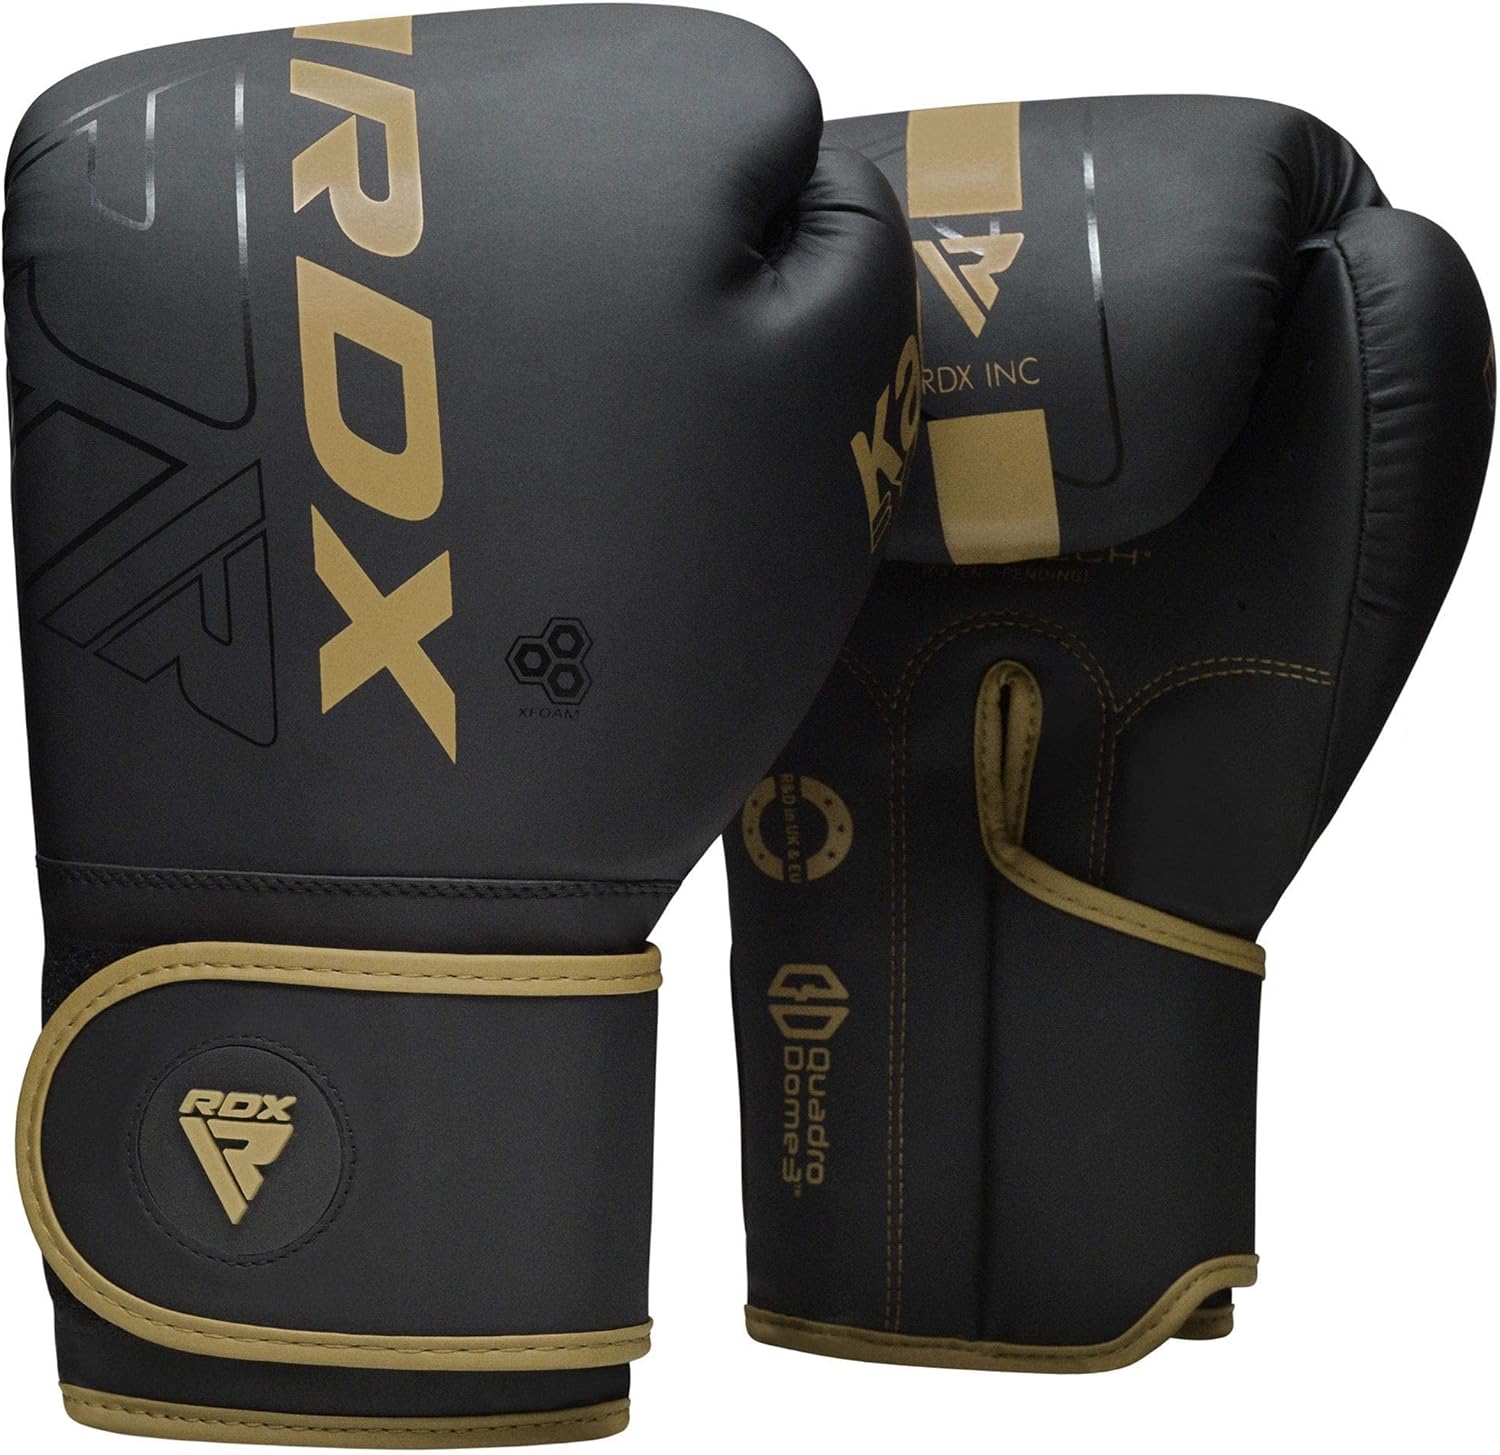 Eclipse Martial Art Supplies Training Gloves GOLDEN / 16 OZ RDX Boxing Gloves Men Women, Pro Training Sparring, Maya Hide Leather Muay Thai MMA Kickboxing, Adult Heavy Punching Bag Gloves Mitts Focus Pad Workout, Ventilated Palm